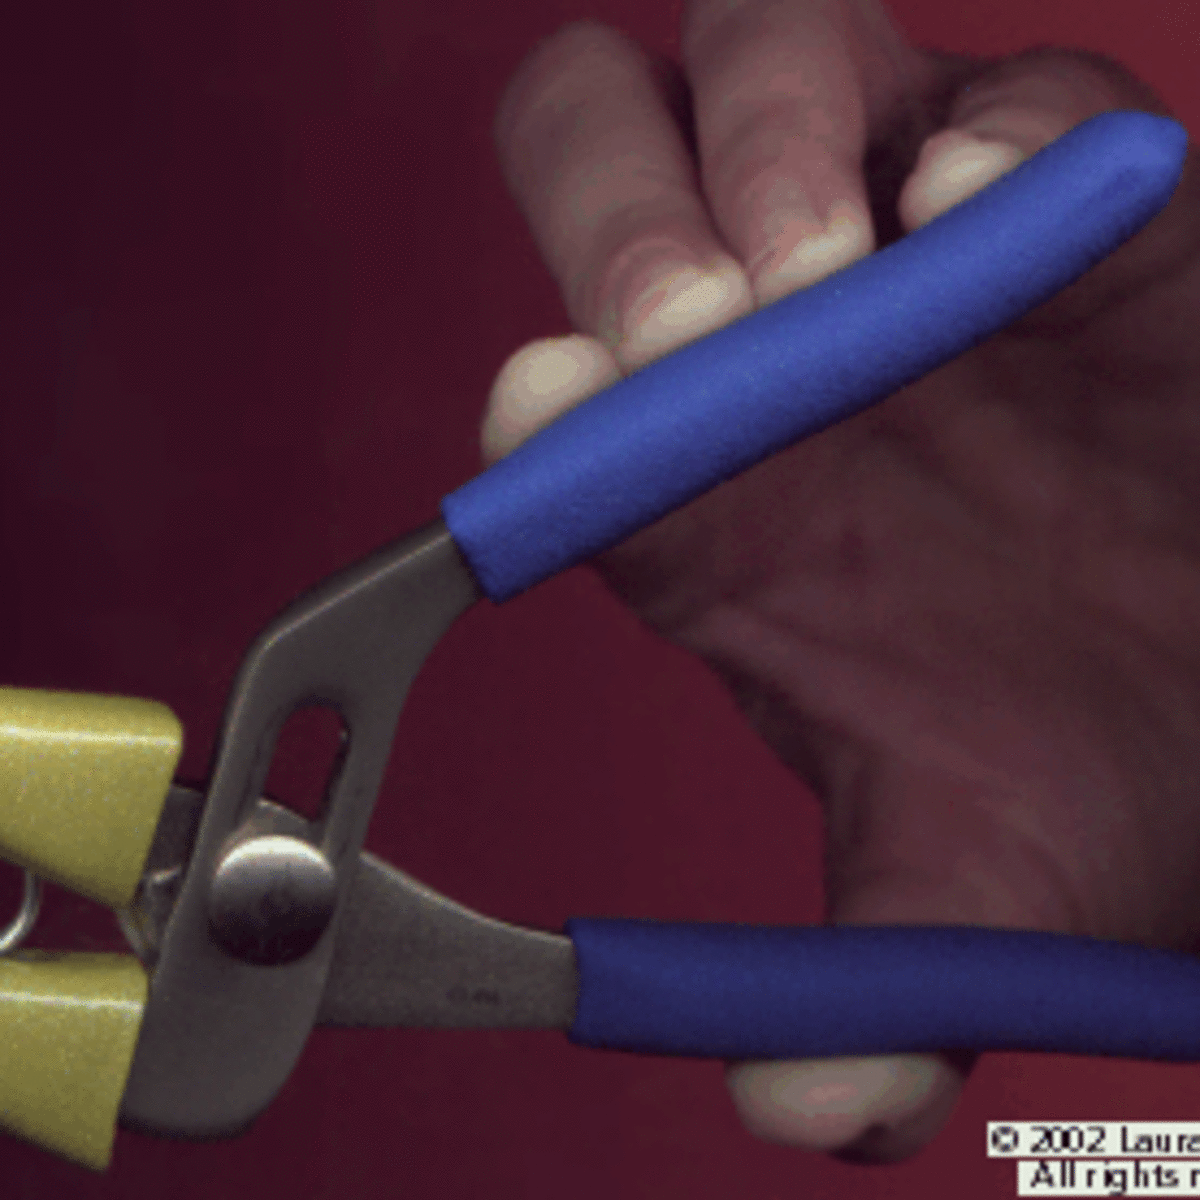 How to Use Wire Looping Pliers 